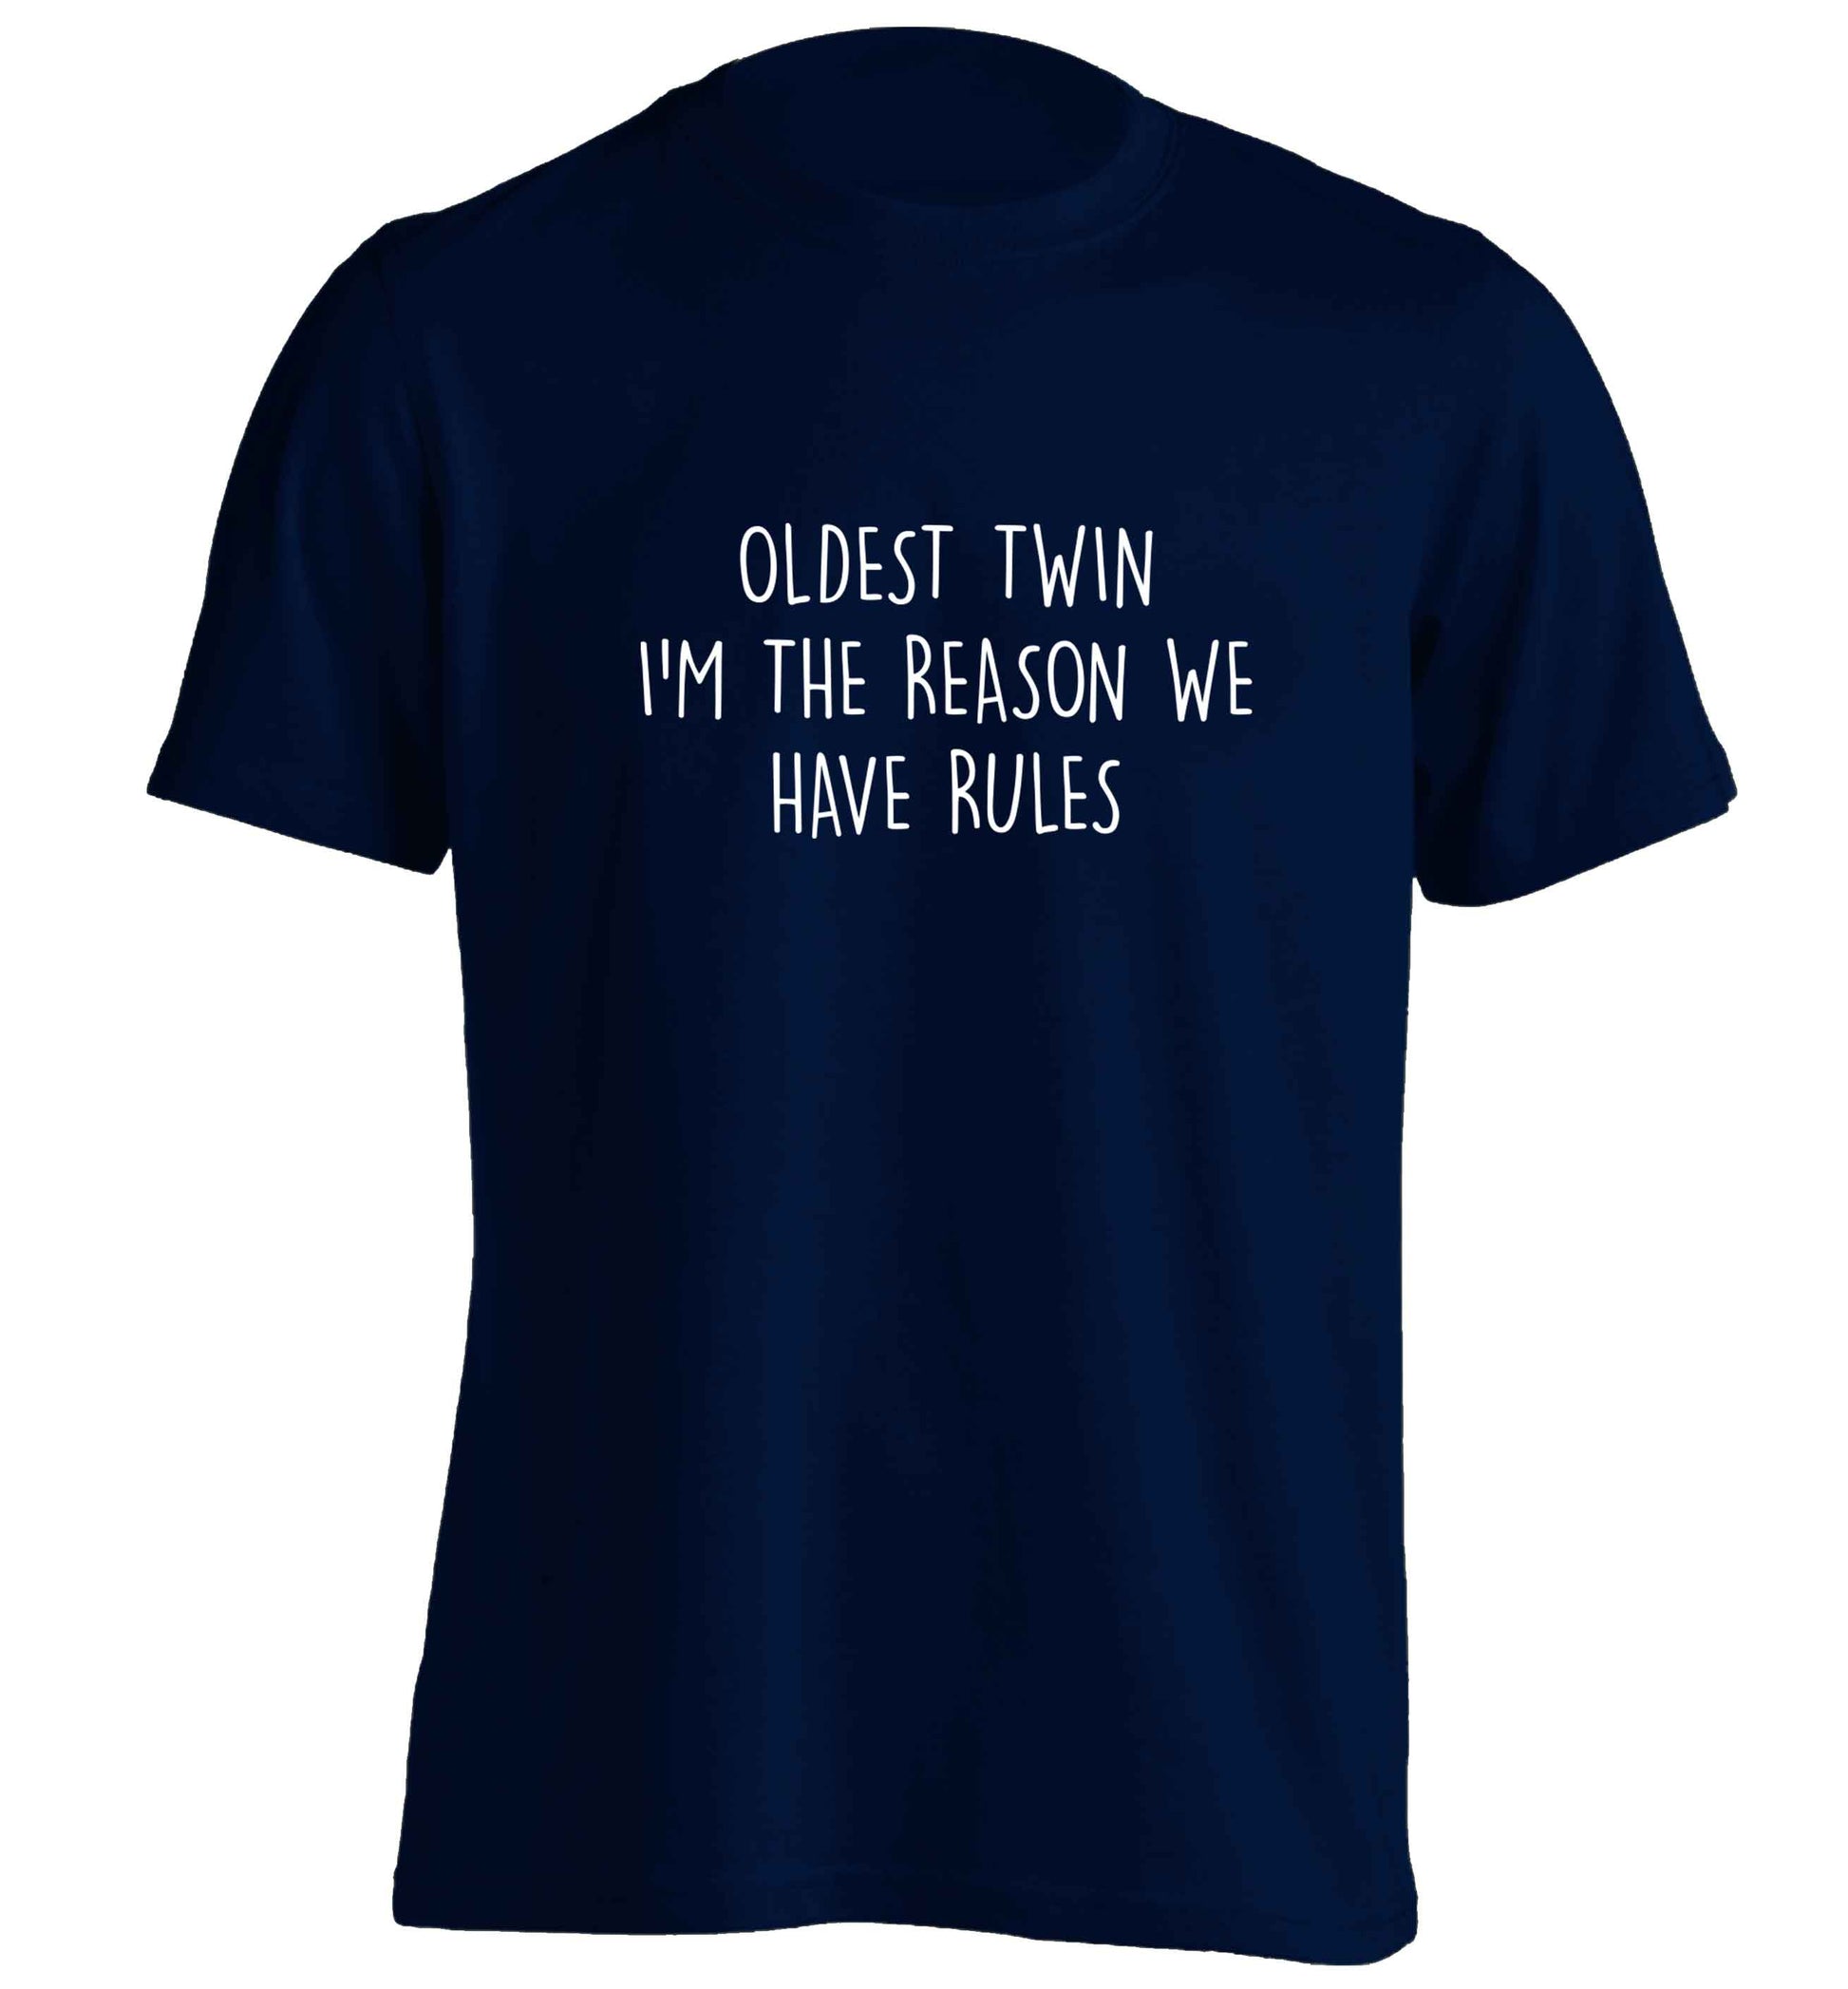 Oldest twin I'm the reason we have rules adults unisex navy Tshirt 2XL